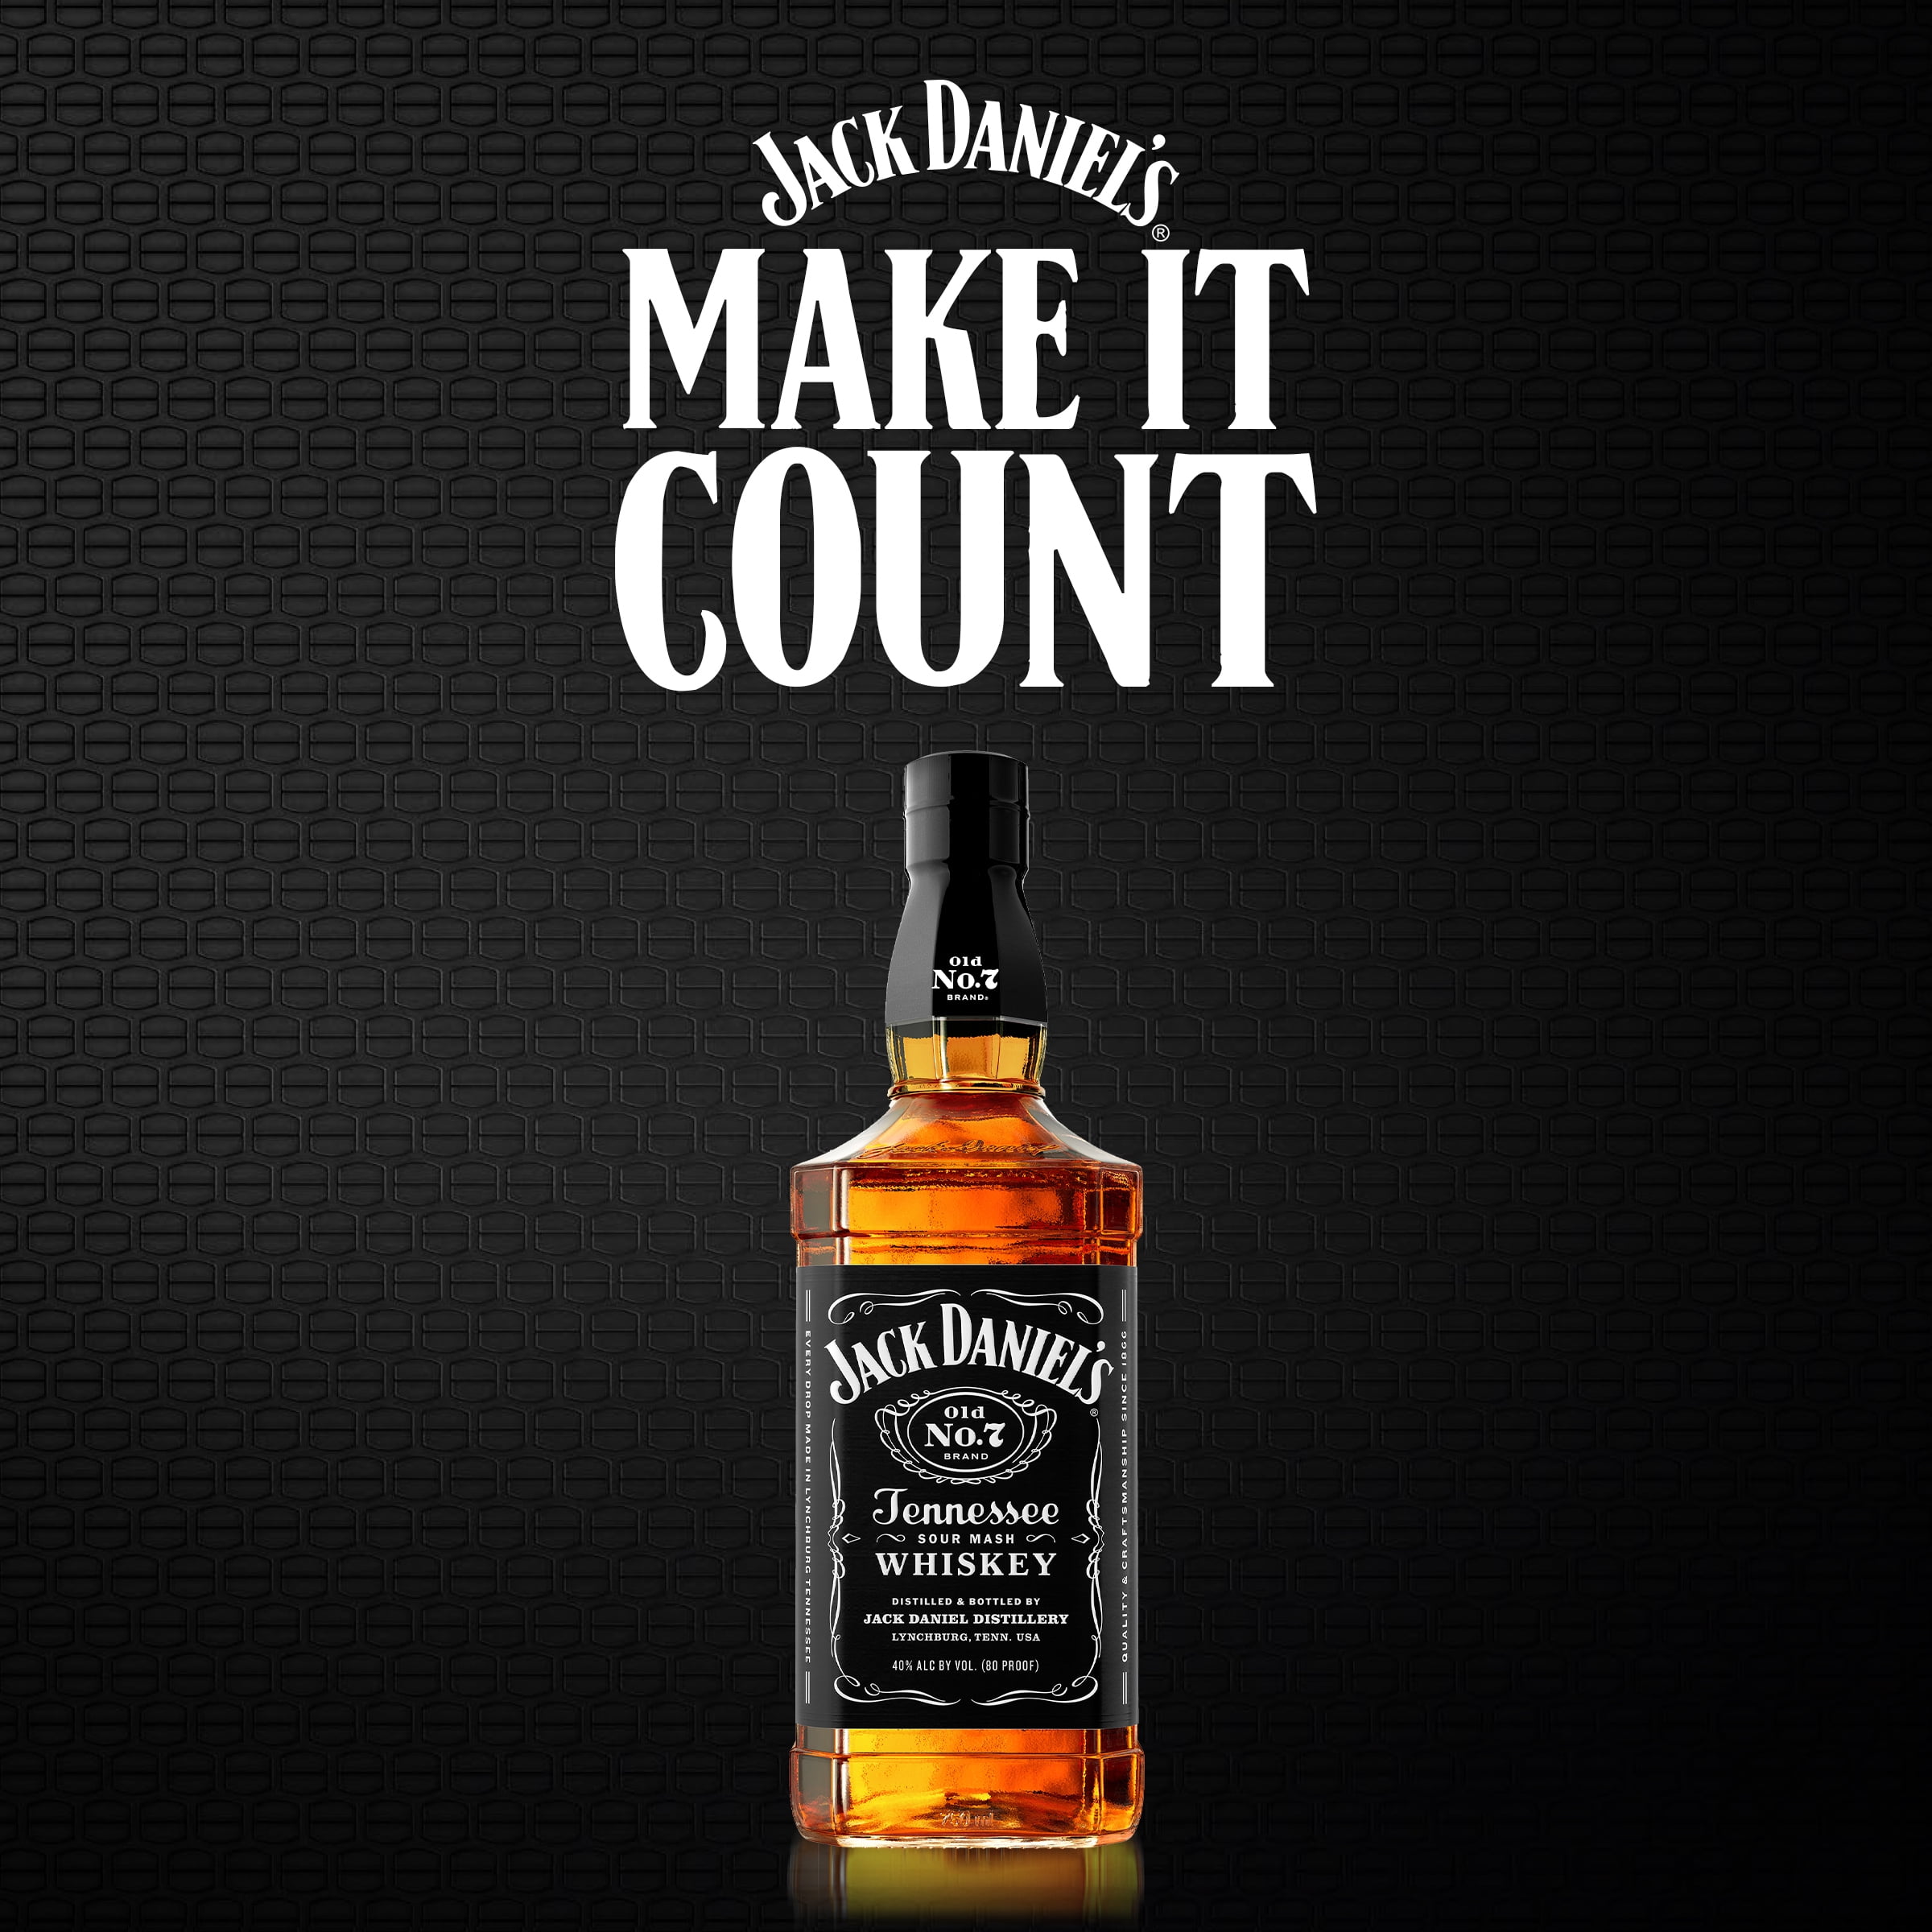 Jack Daniel's Old No. 7 Tennessee Whiskey, 750 ml Bottle, 80 Proof